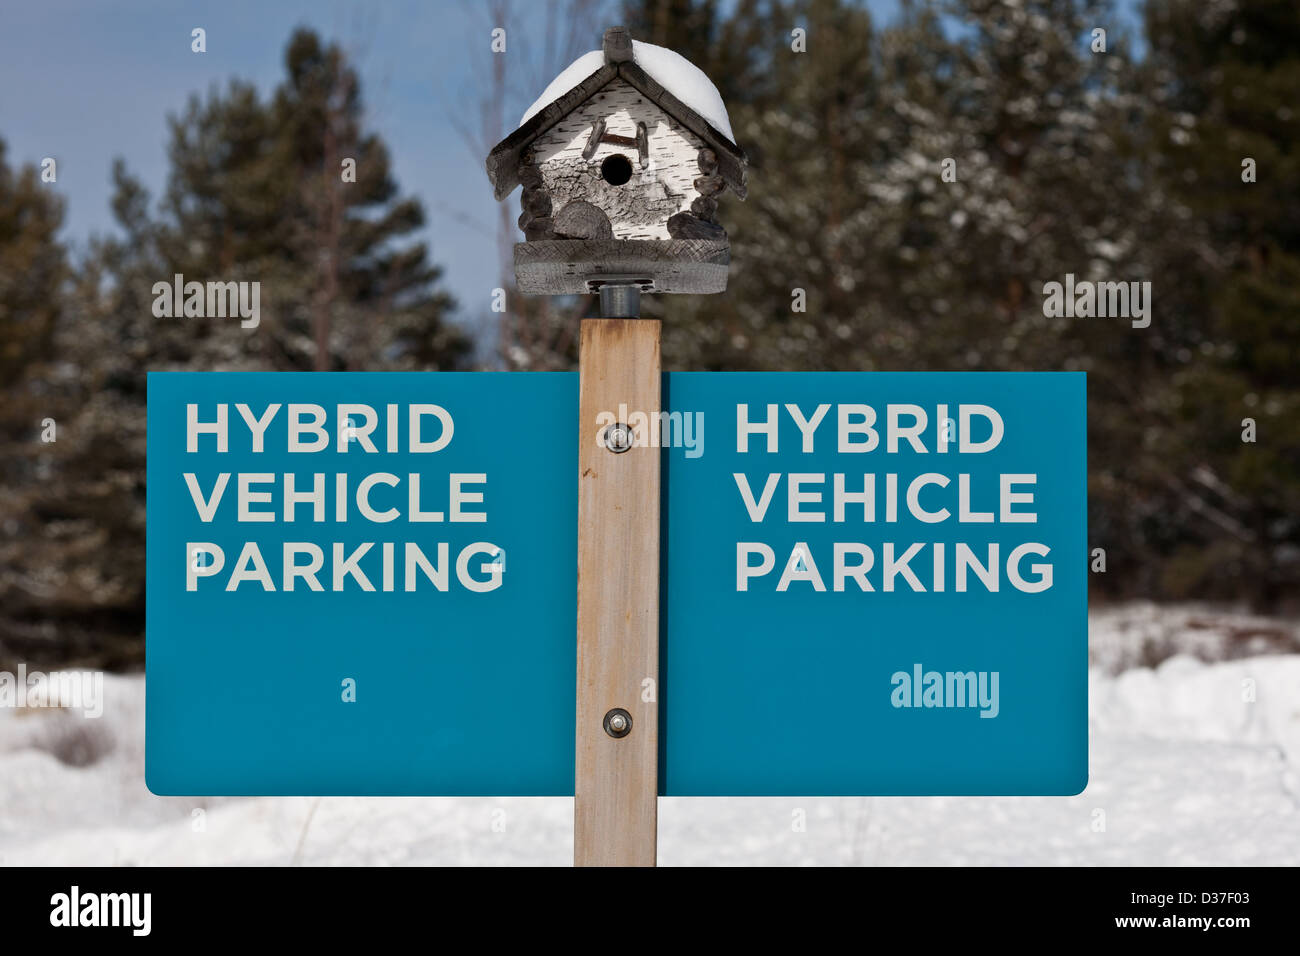 A sign for Hybrid Vehicle Parking, New York State Stock Photo